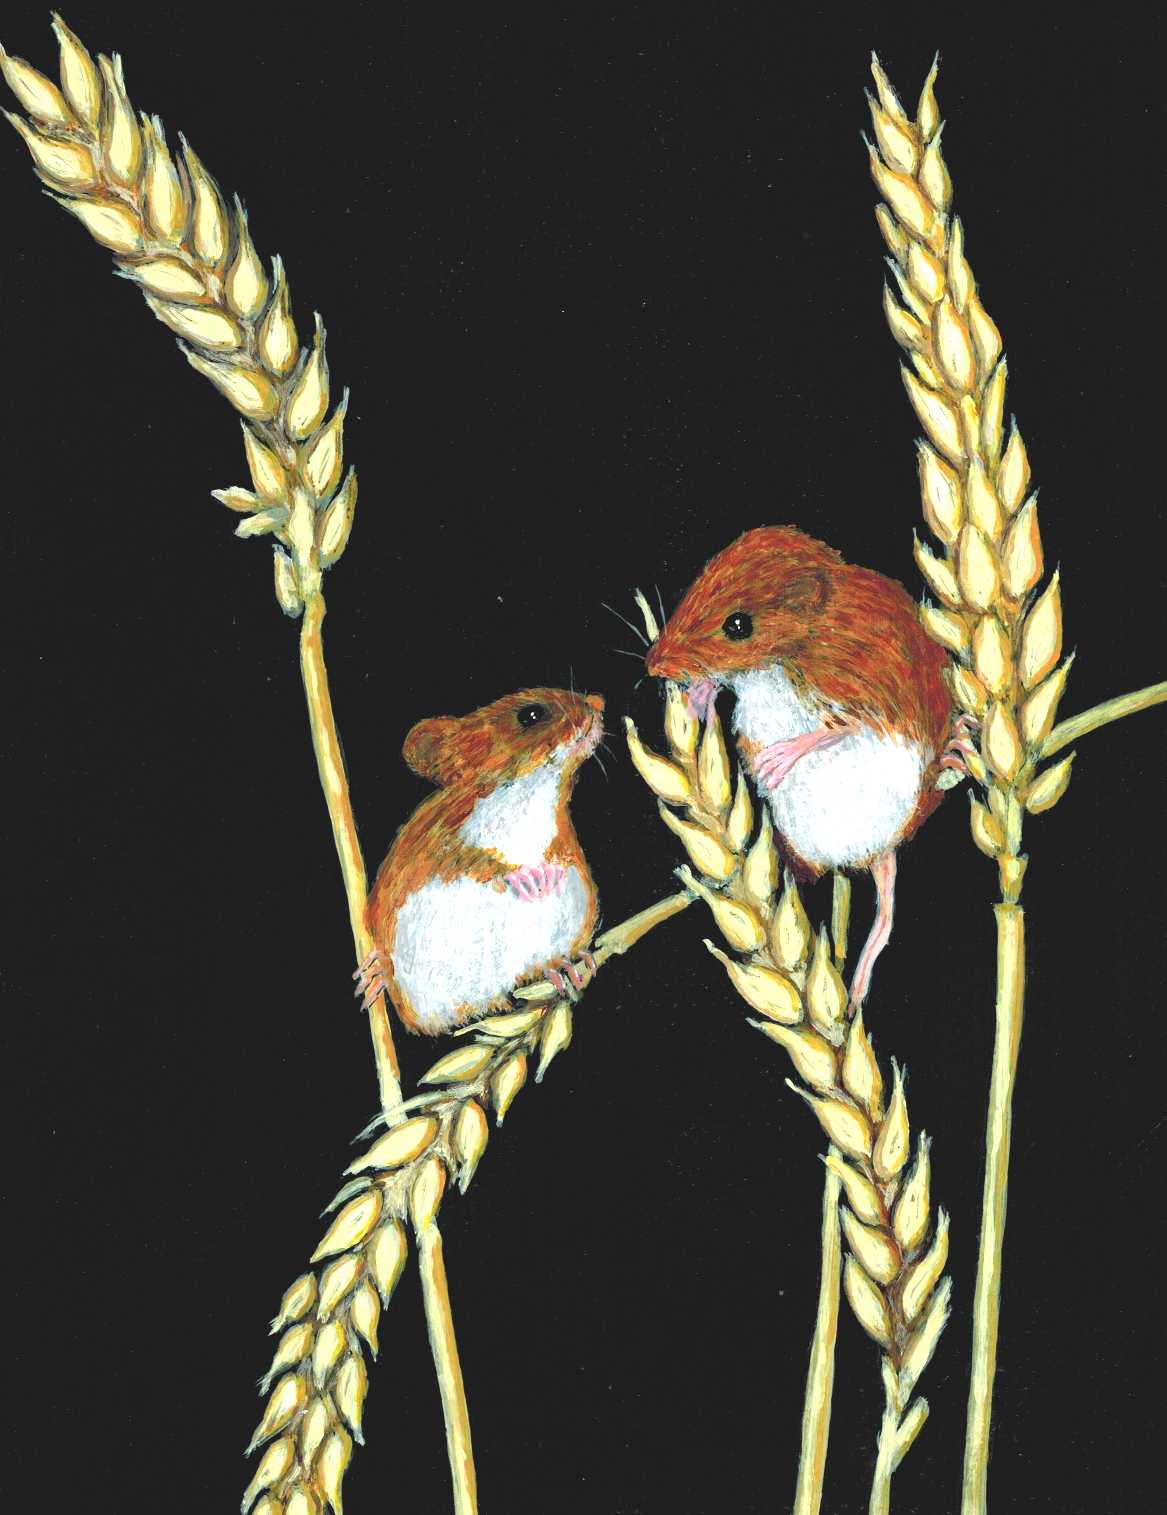 Original painting by Nelson Kruschandl, Field Mice, acrylic on paper